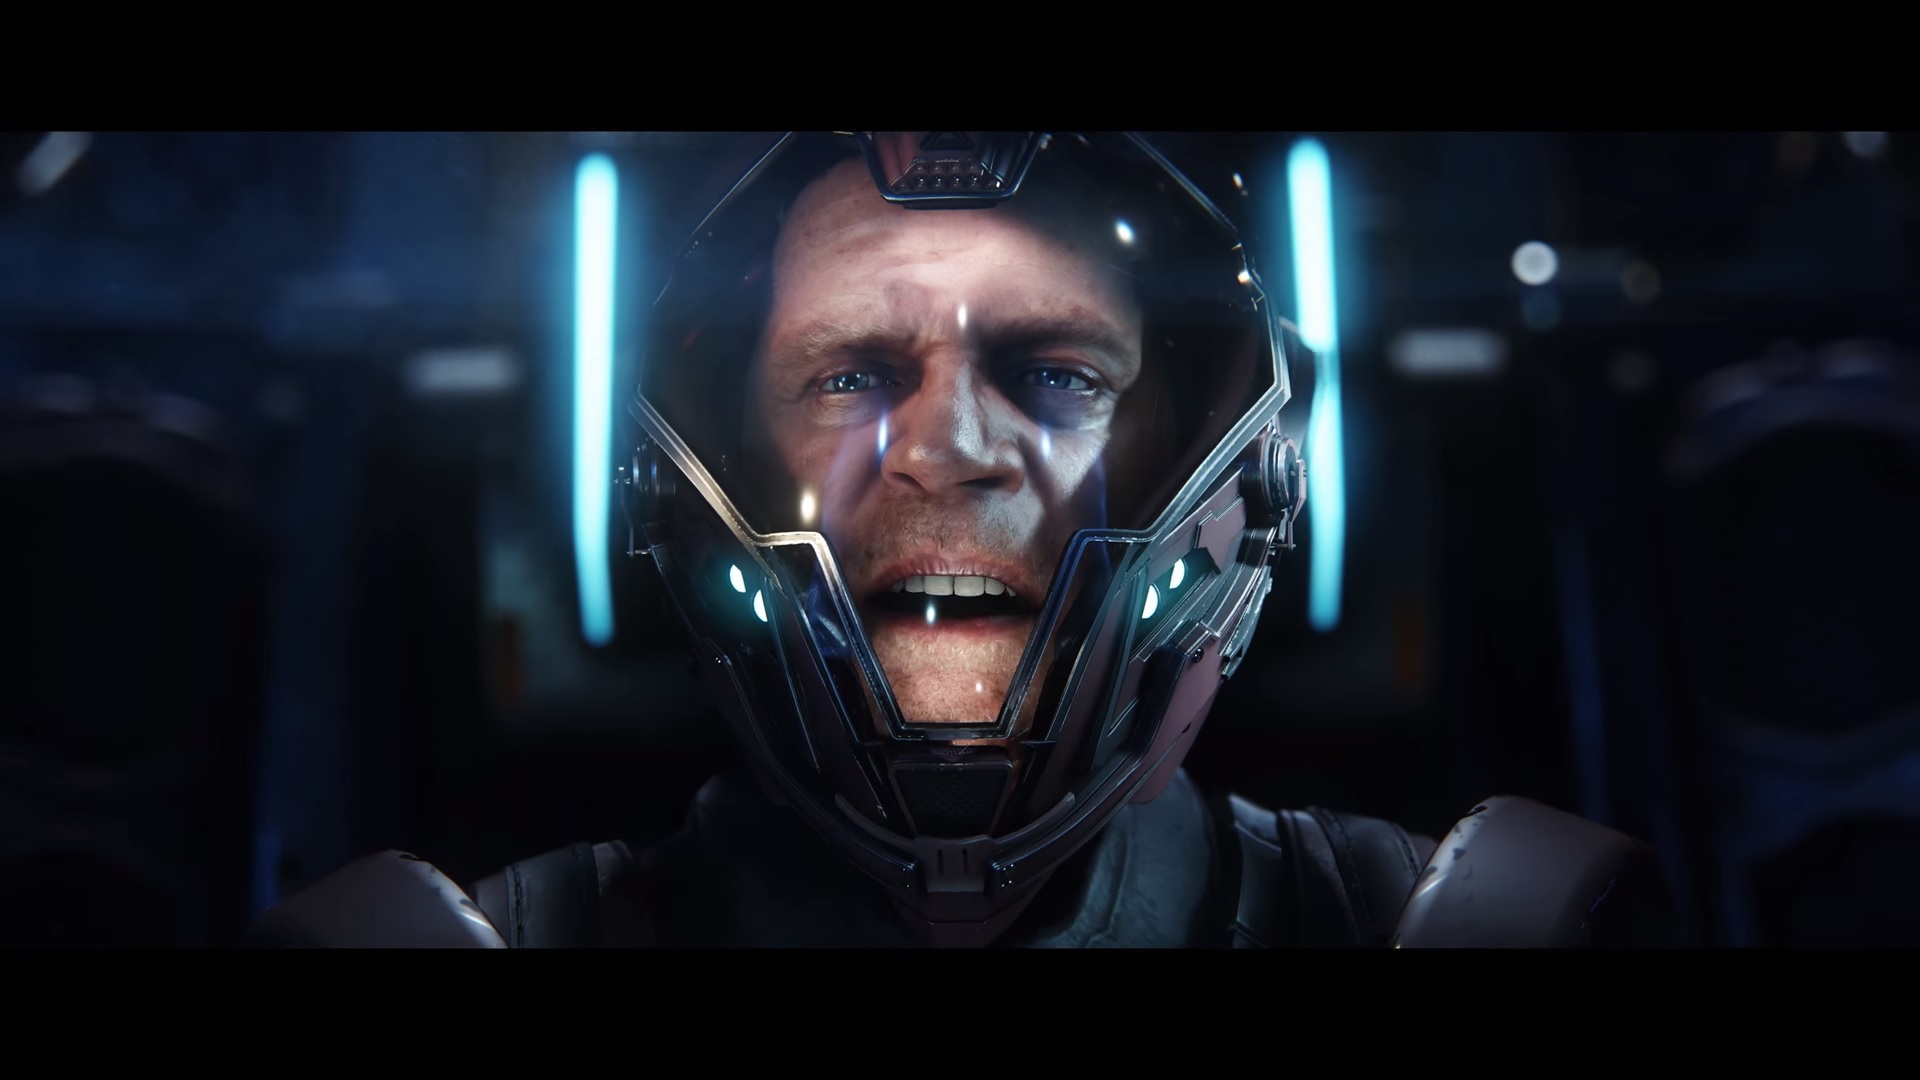 Star Citizen 'Alpha 3.17.2' update releases today with new content